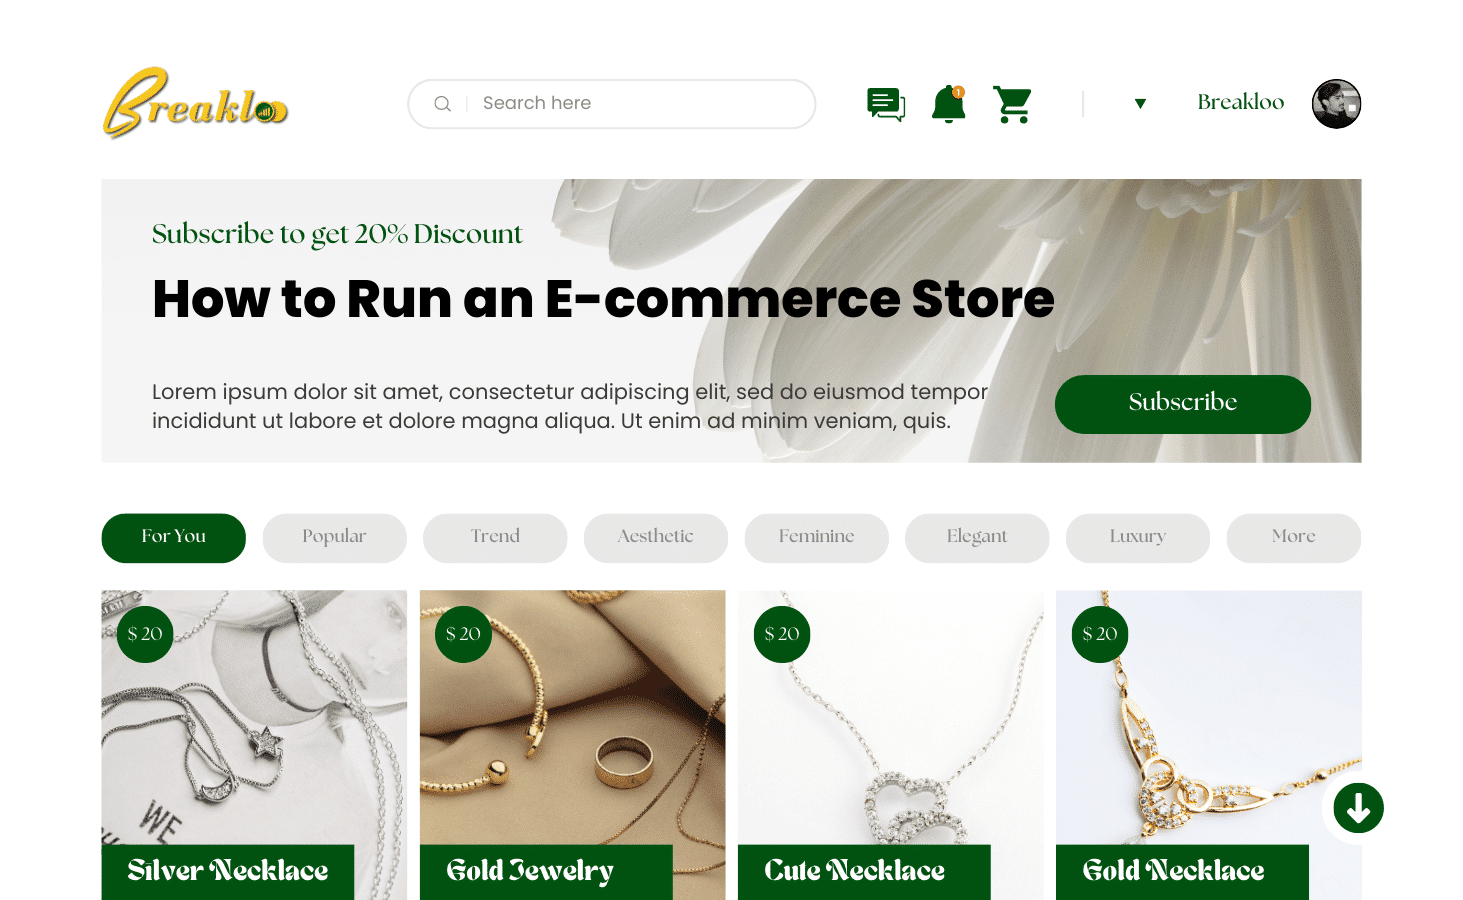 How to Run an E-commerce Store